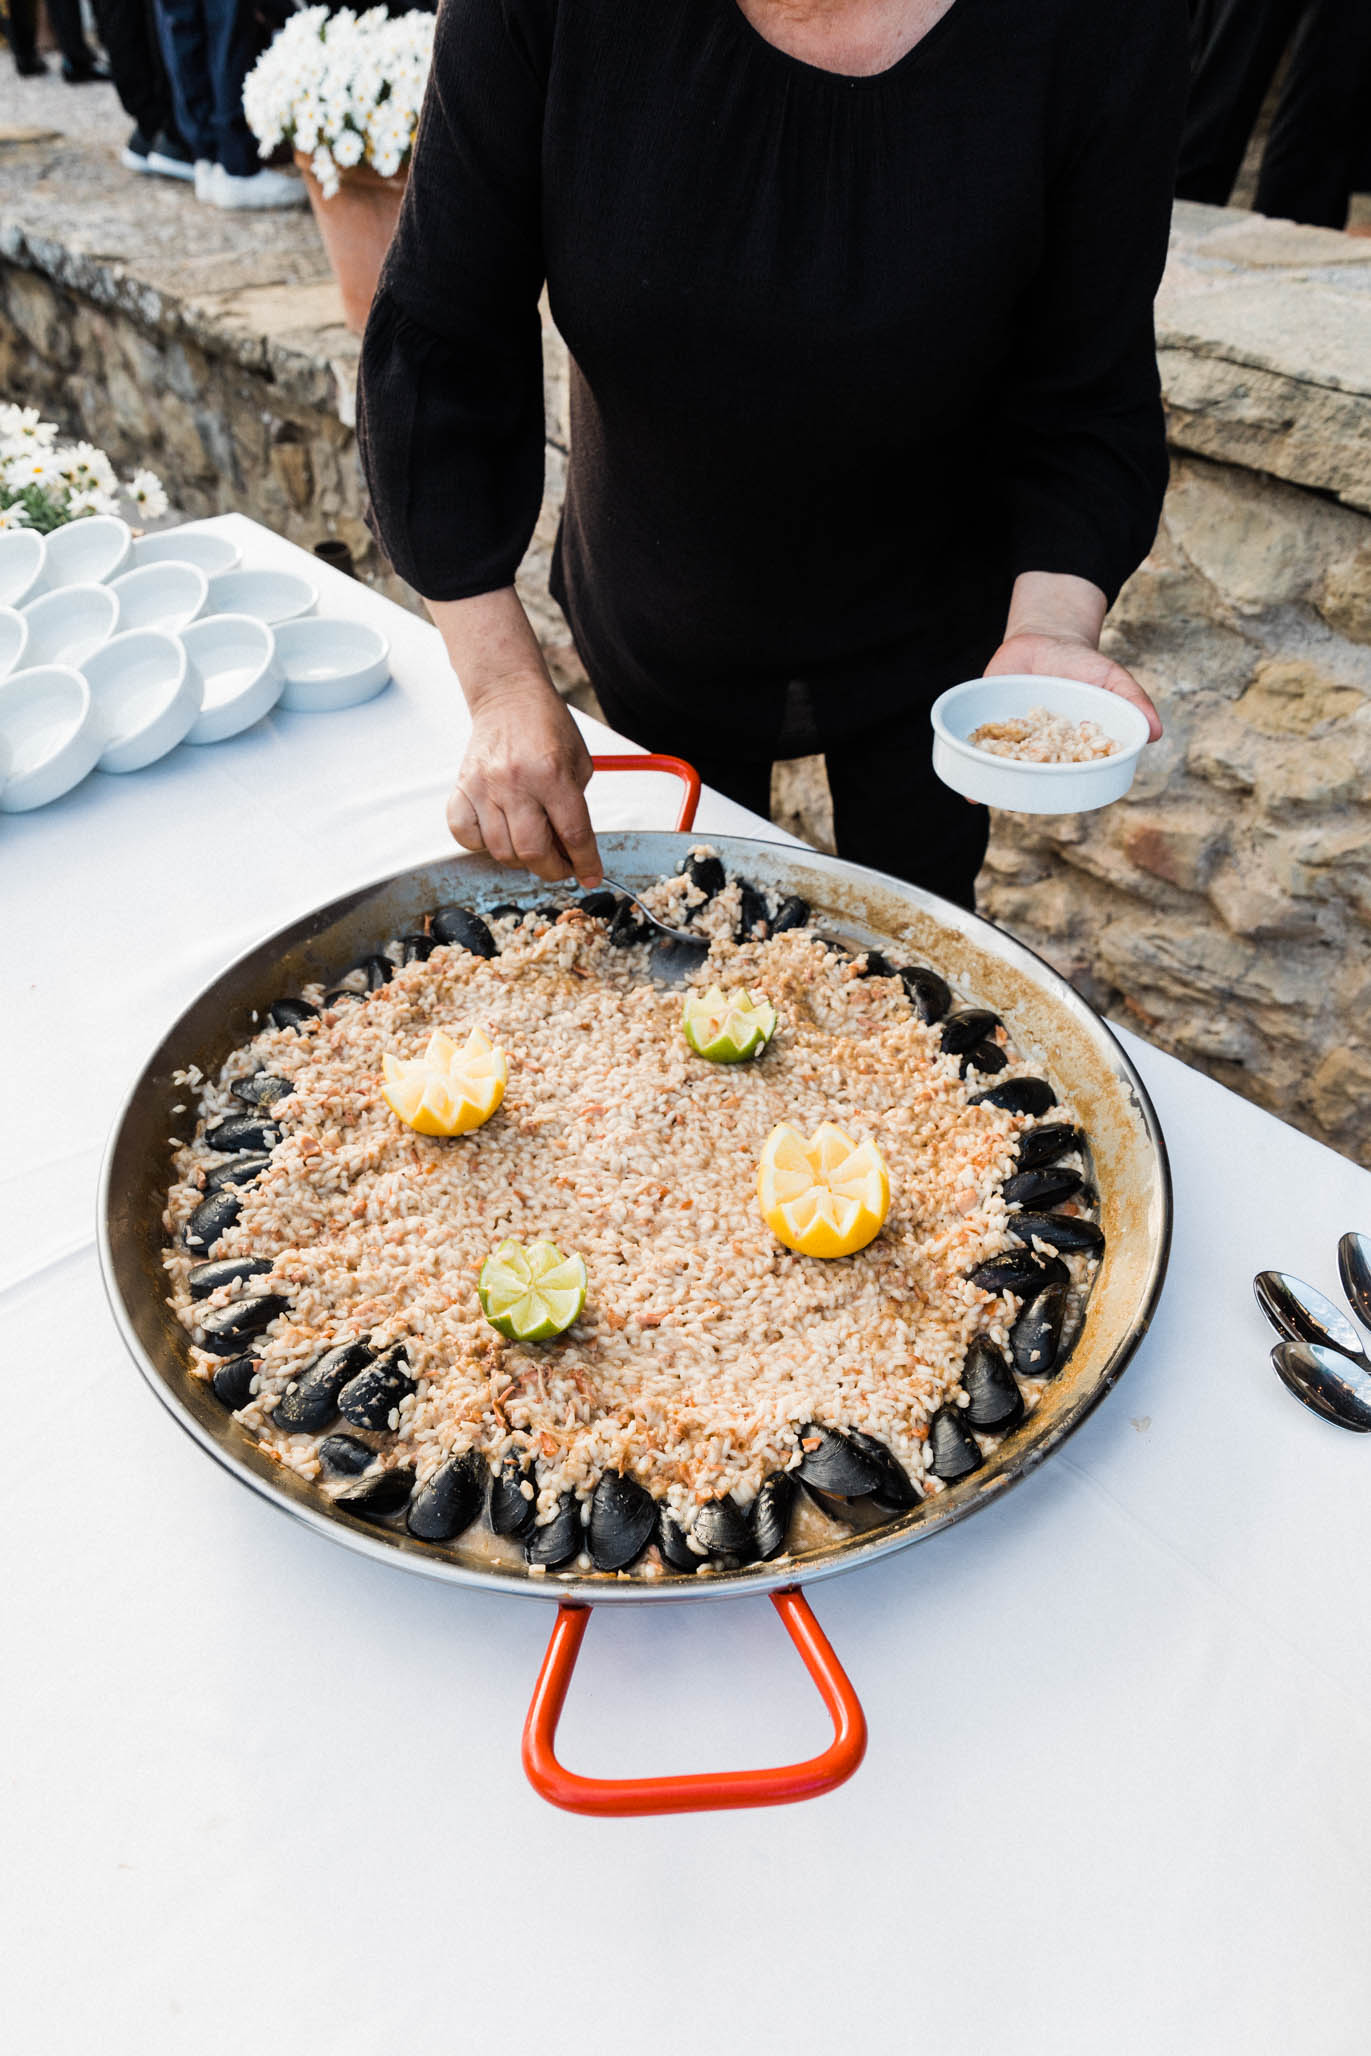 Of course there was Paella. It isn’t a Catalonian wedding with out a good ol’ dish of seafood Paella!